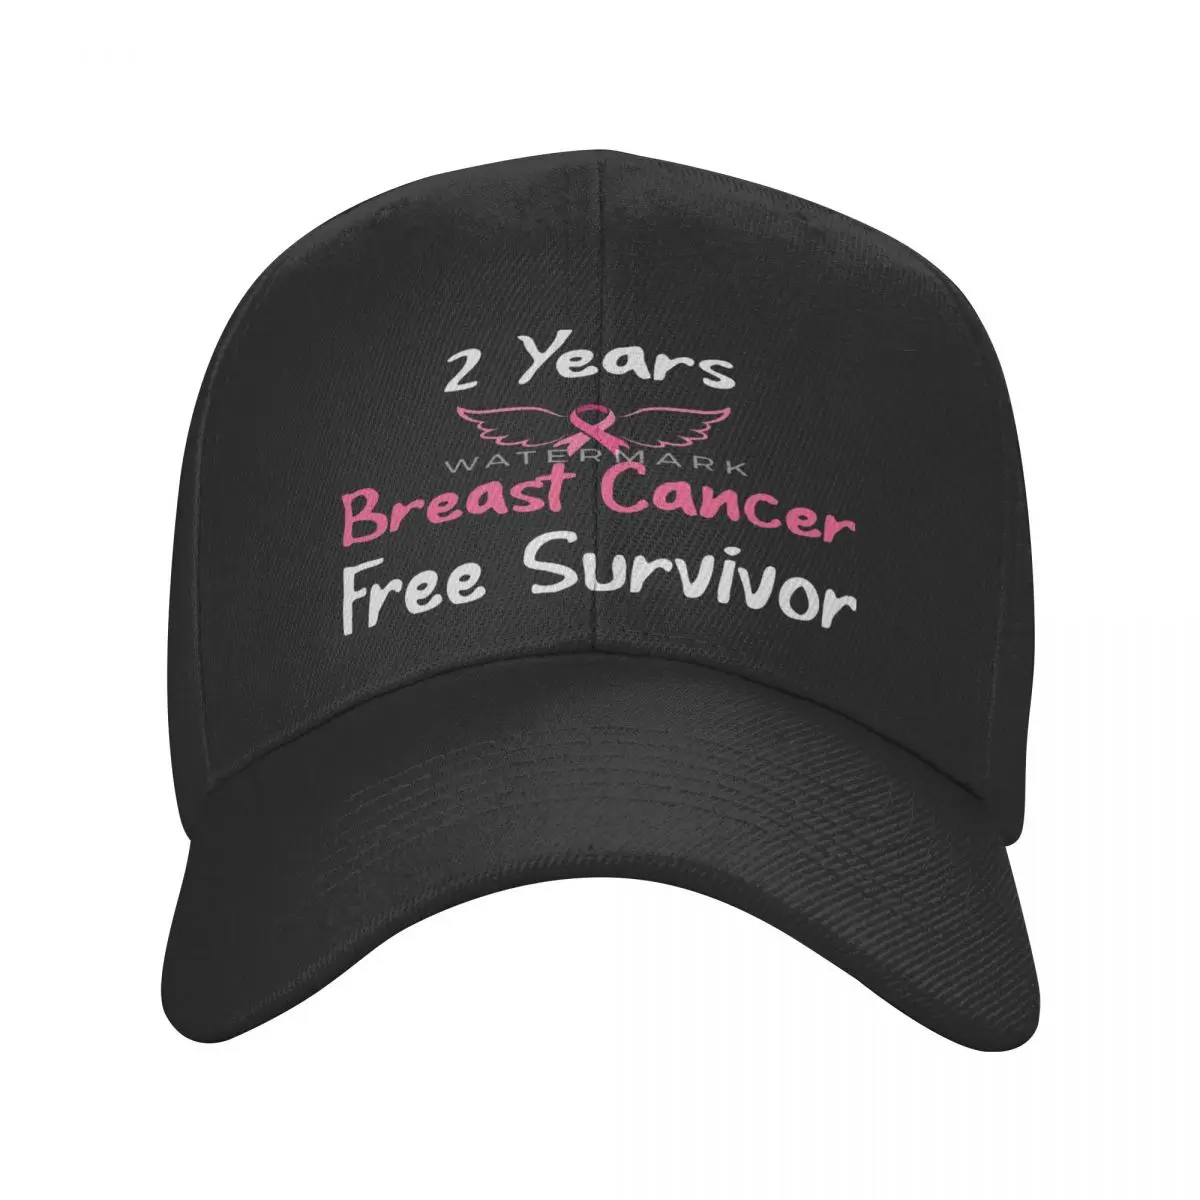 

2 Years Breast Cancer Free Survivor Casquette, Polyester Cap Customizable For Adult Adjustable Cap Nice Gift